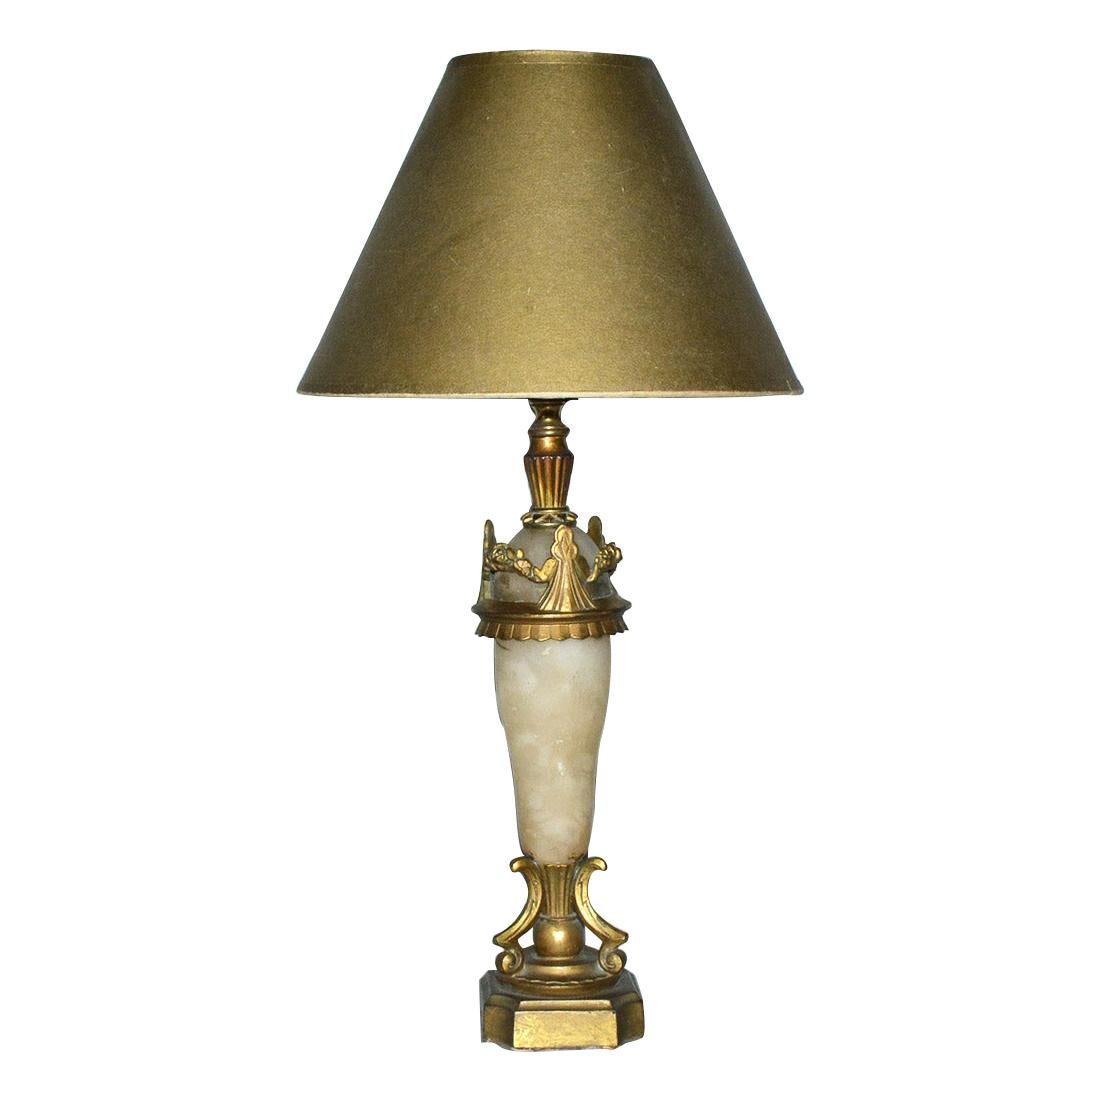 Early 20th Century Onyx and Gold Metal Table Lamp